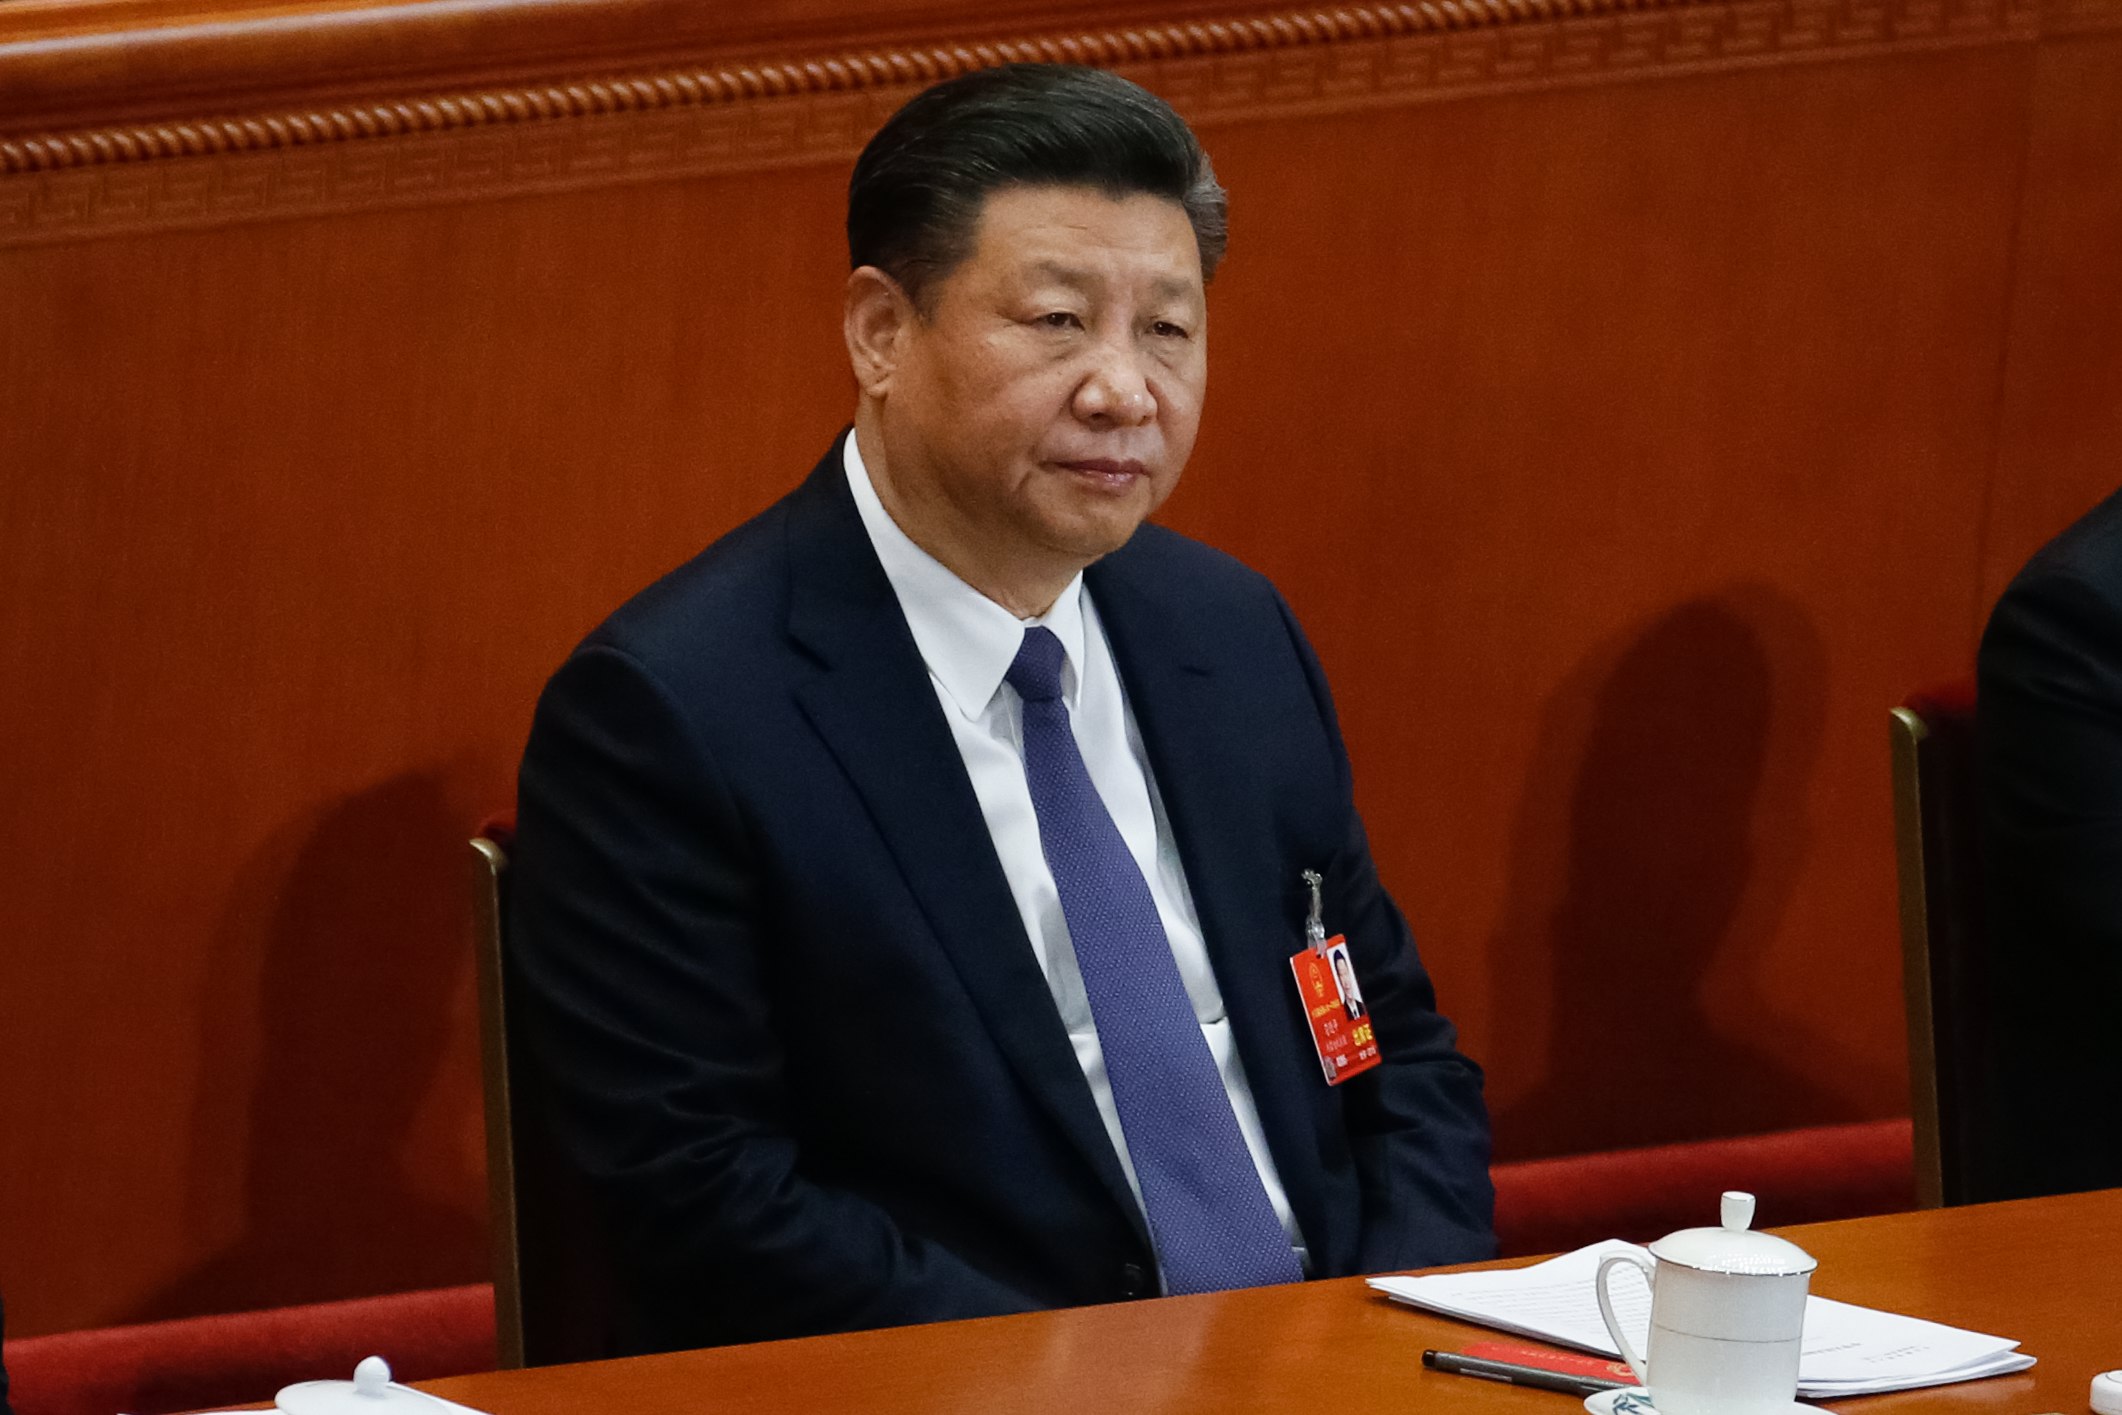 2018-03-11 14:57:59 epa06595570 Chinese President Xi Jinping, attends the third plenary session of the 13th National People's Congress (NPC) at the Great Hall of the People in Beijing, China, 11 March 2018. The NPC has over 3,000 delegates and is the world's largest parliament or legislative assembly though its function is largely as a formal seal of approval for the policies fixed by the leaders of the Chinese Communist Party. The NPC runs alongside the annual plenary meetings of the Chinese People's Political Consultative Conference (CPPCC), together known as 'Lianghui' or 'Two Meetings'. EPA/ROMAN PILIPEY